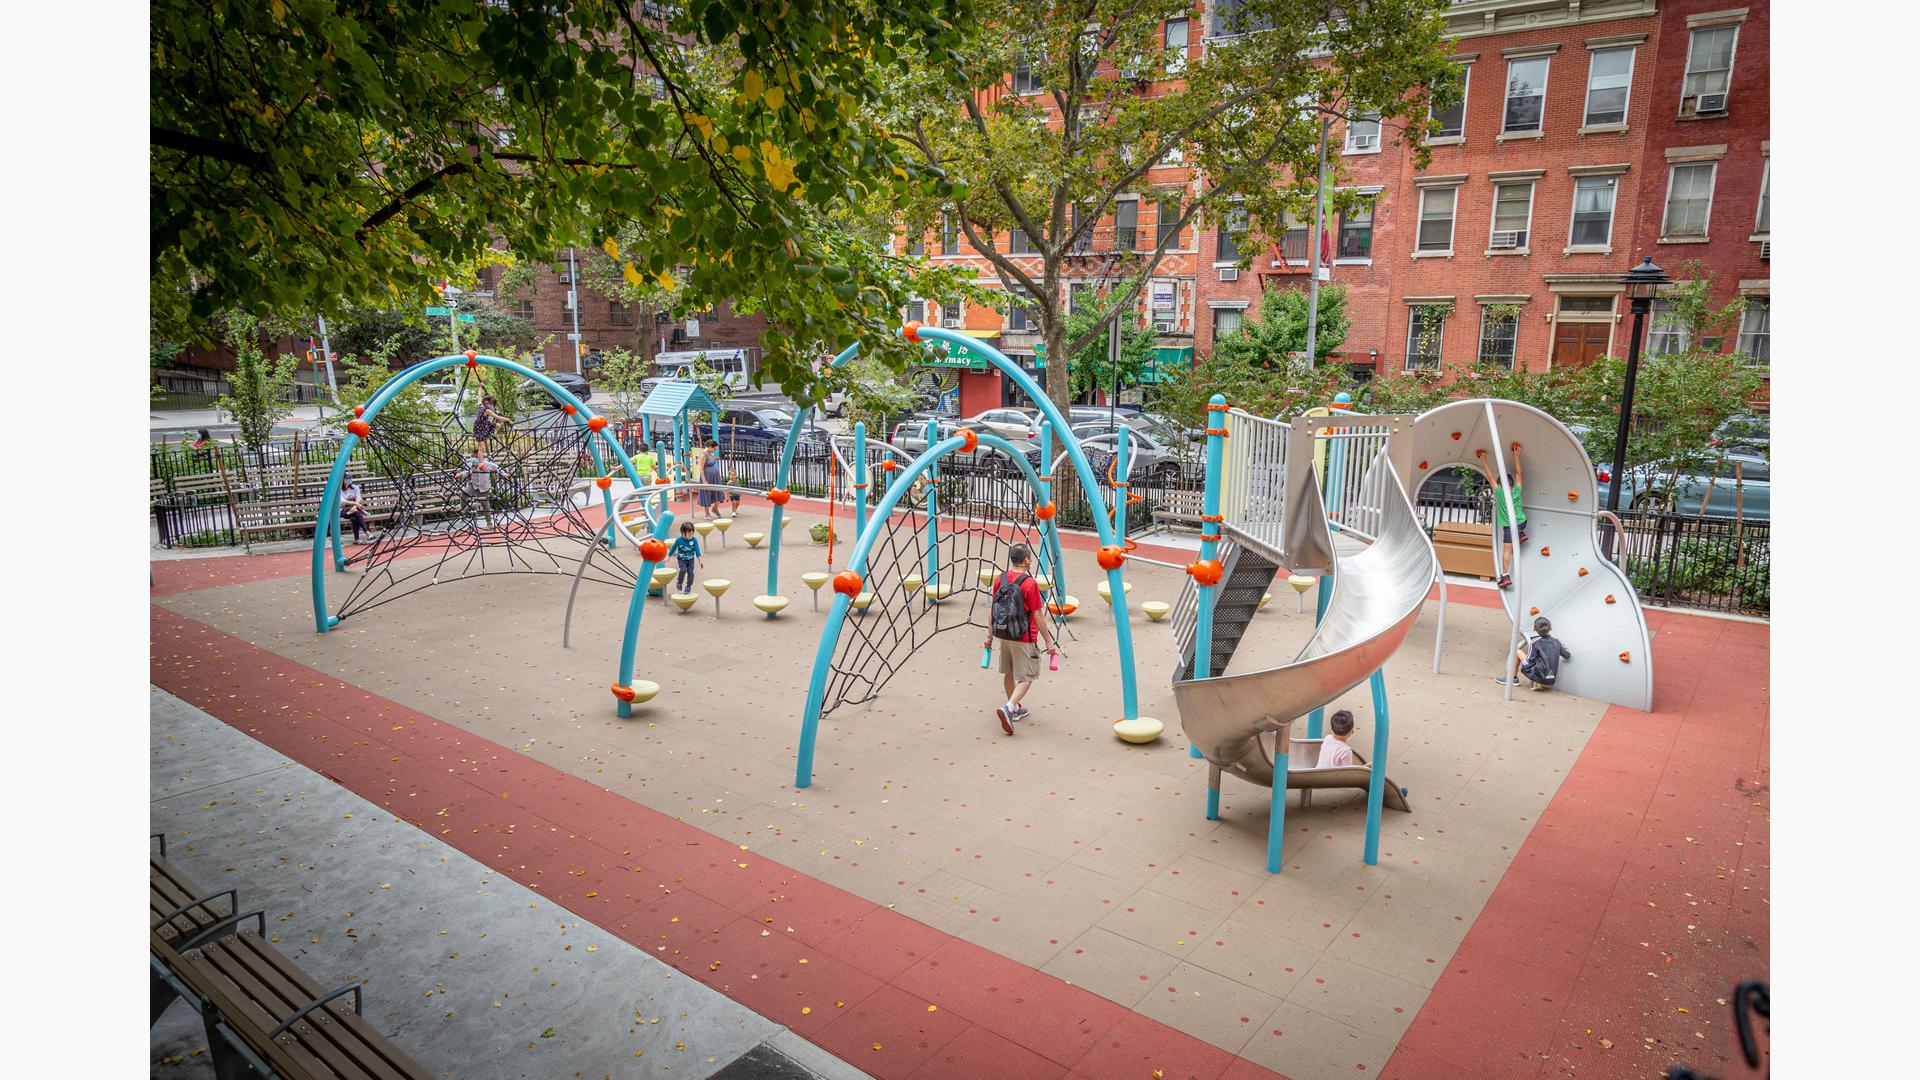 Blue arched playground with kids climbing on nets with a stainless steel slide located in a city park next to buildings with windows. 